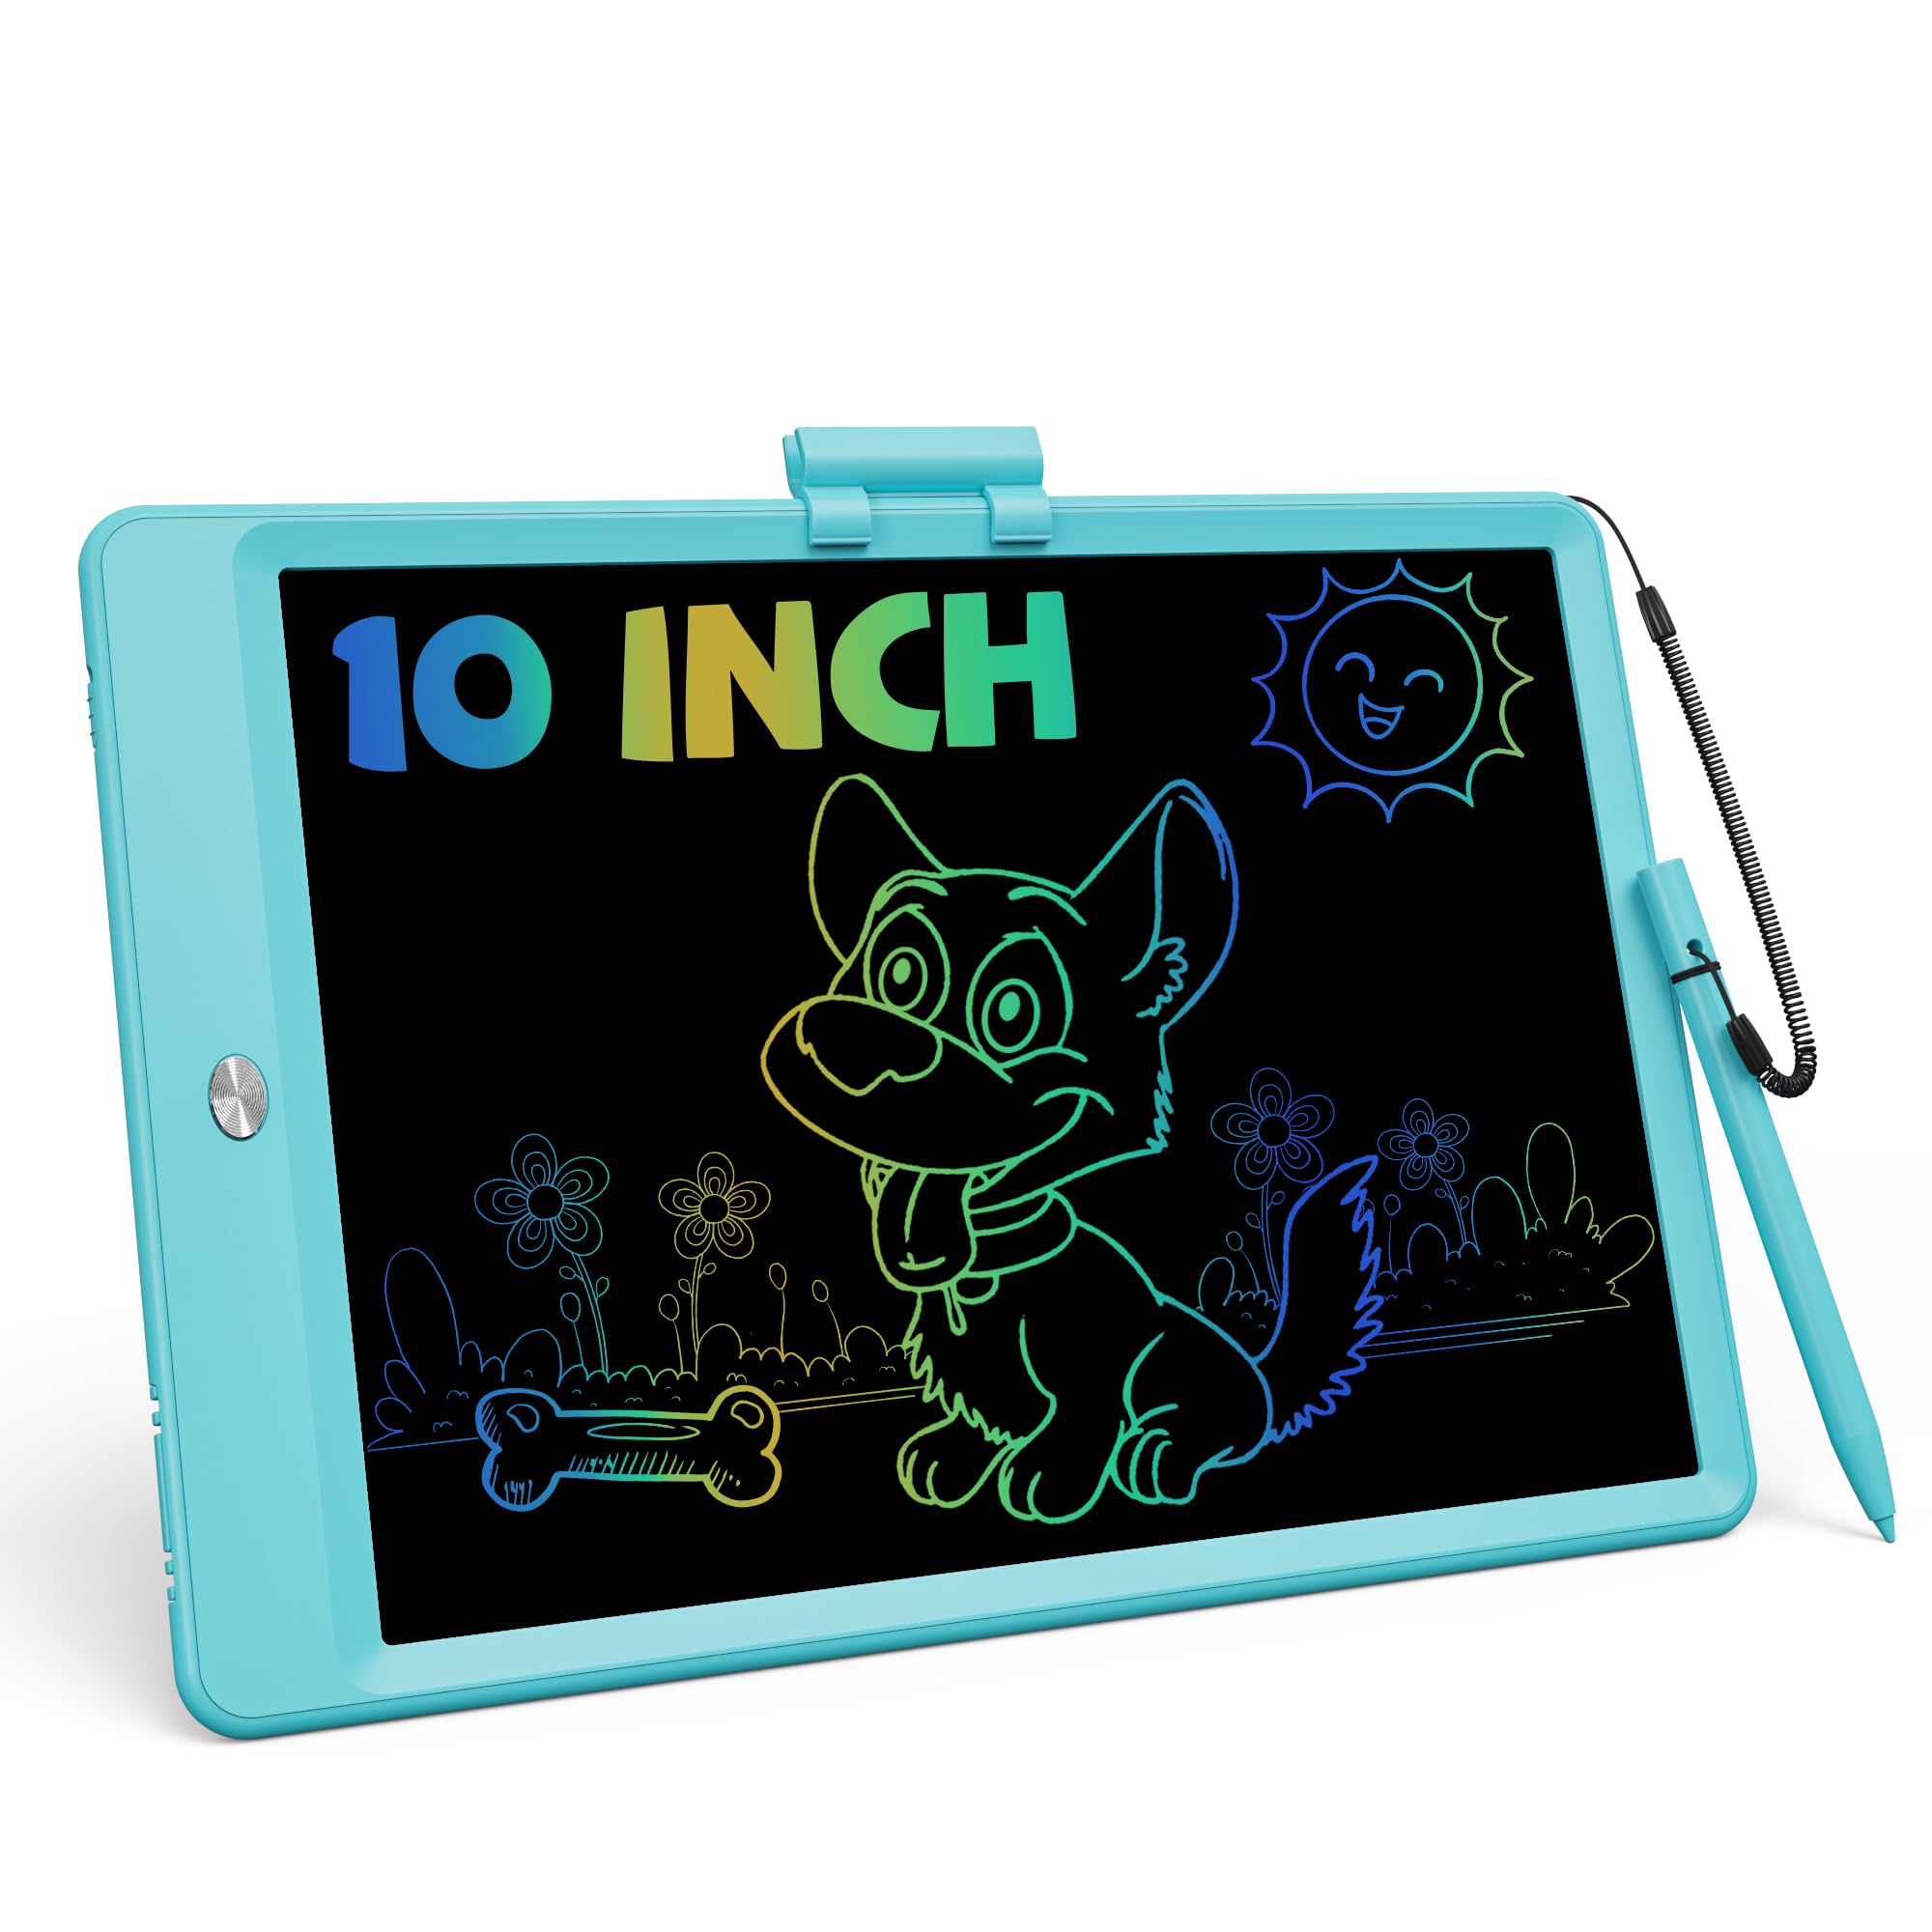 Derabika LCD-Writing-Tablet-for-Kids,10 Inch Toddler Toys Doodle Board Drawing Pad Gifts,Drawing-Board-Educational-and-Learning-Toy Birthday-Gift, Drawing Tablet for Boys Girls 3 4 5 6 Years Old(Blue)